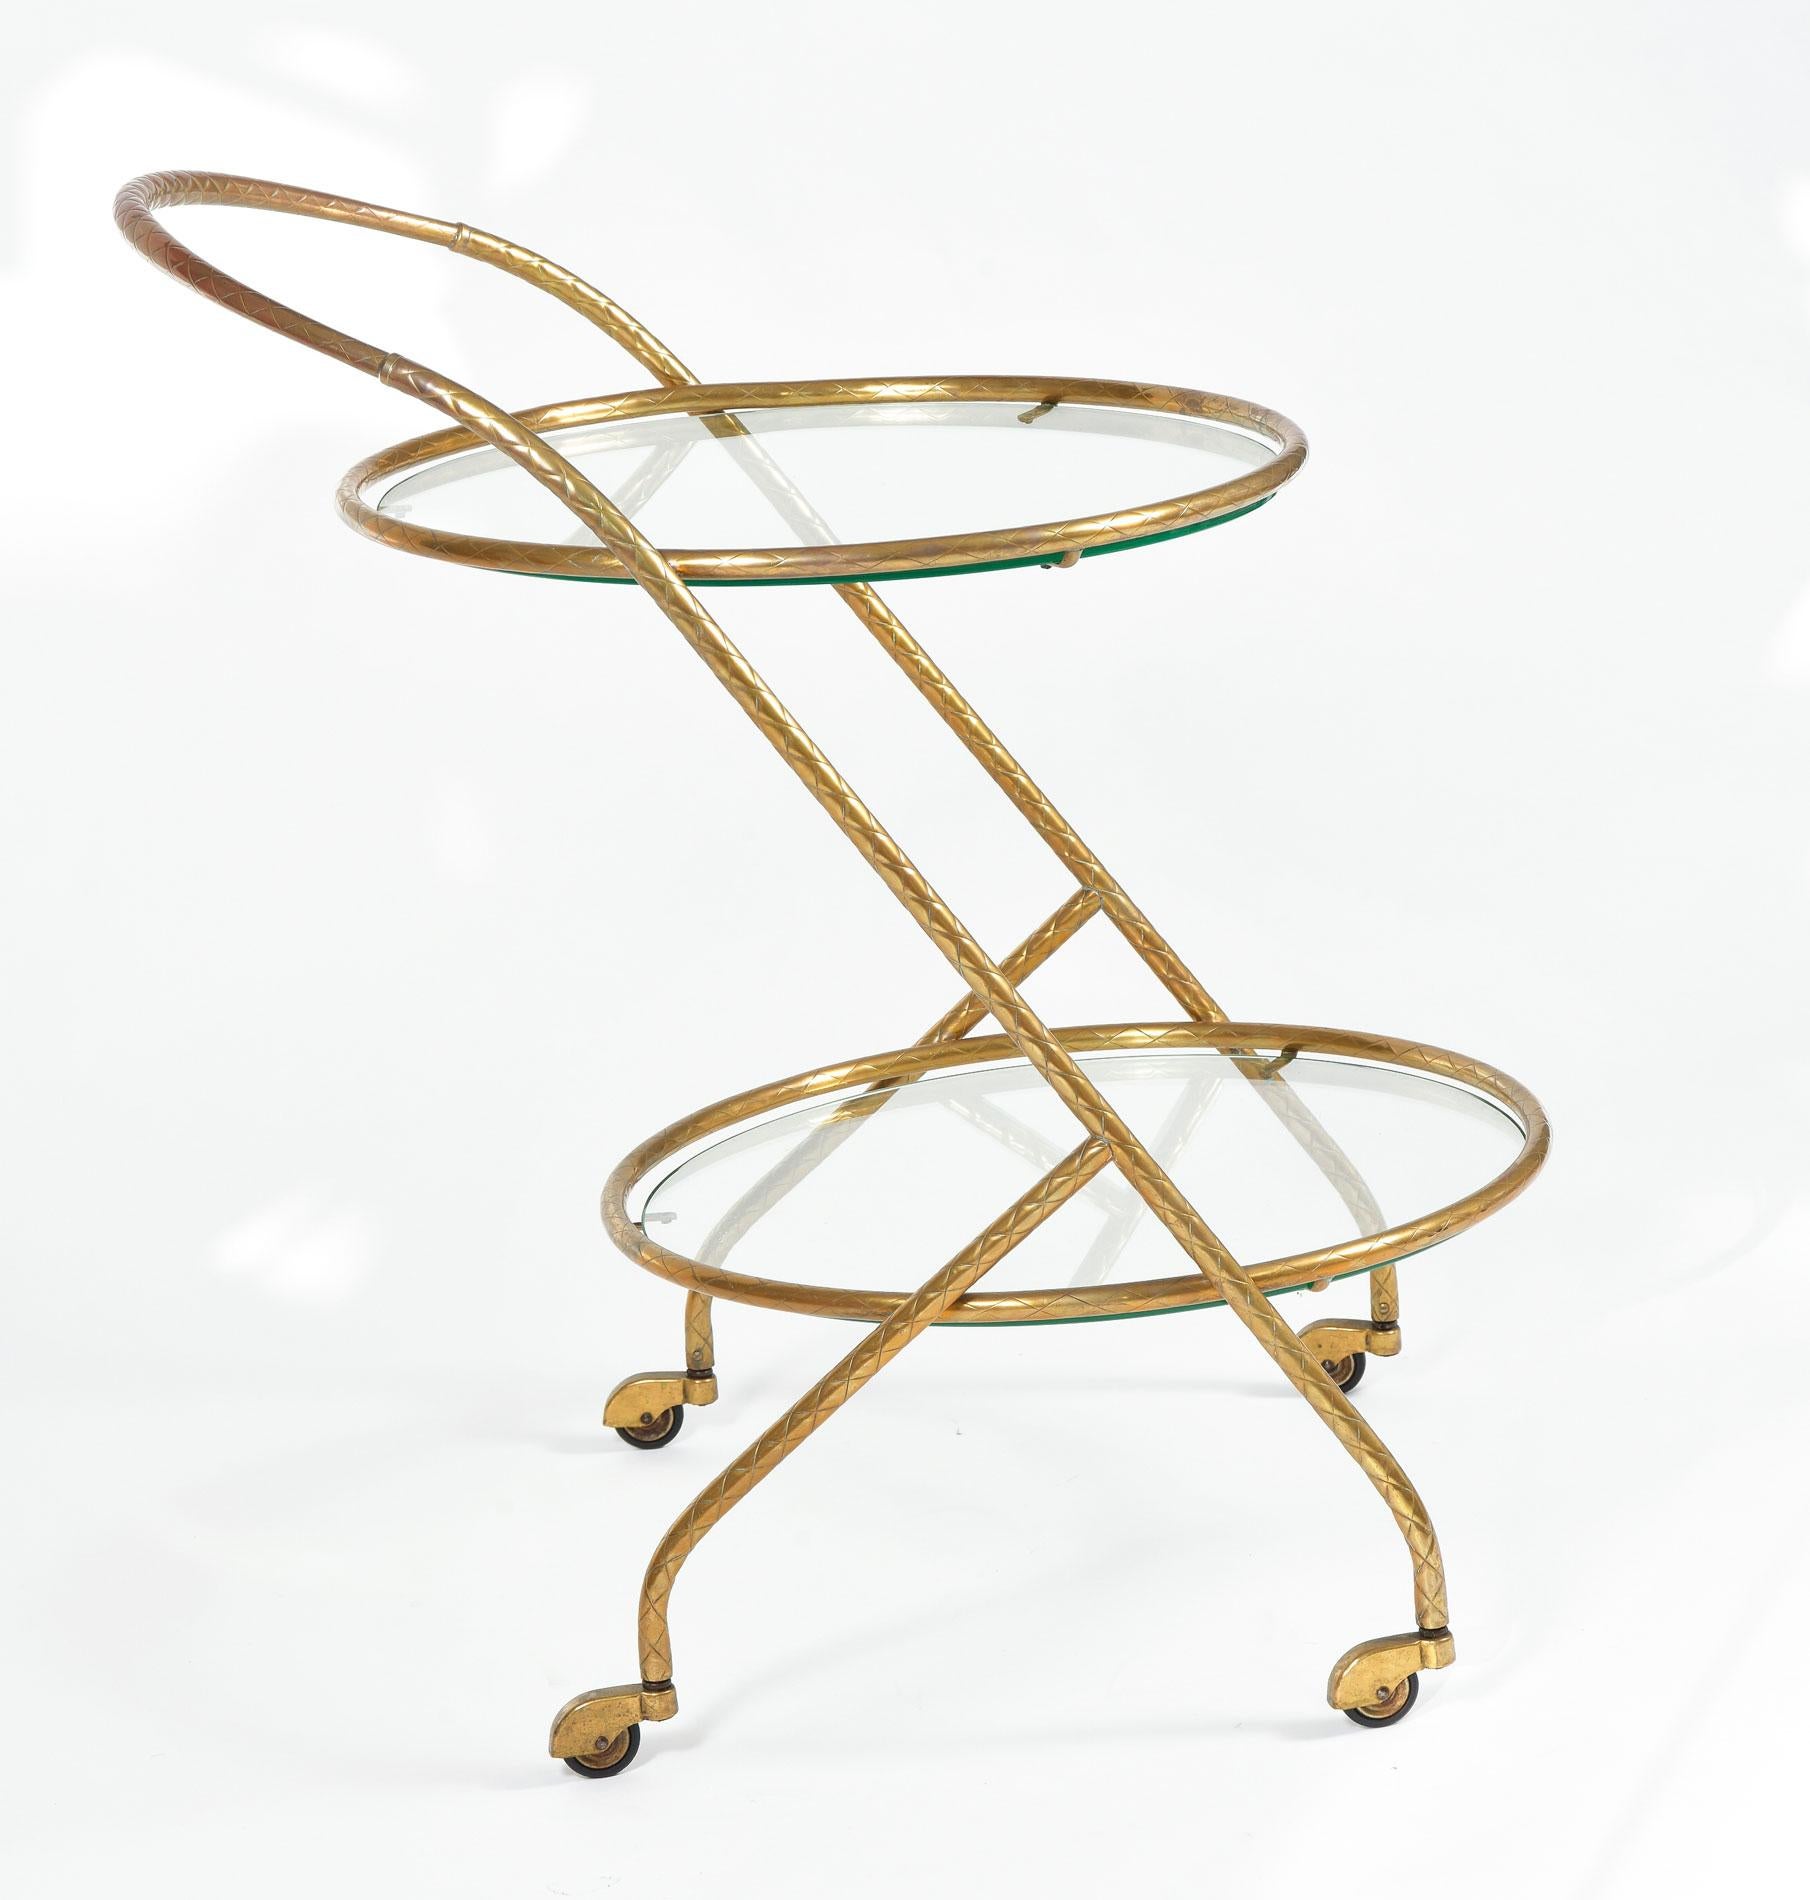 Two-tiered circular drinks trolley. Brass handle, frame and legs are etched with decorative criss-cross patterning. Four matching brass covered caster wheels allow for easy movement.